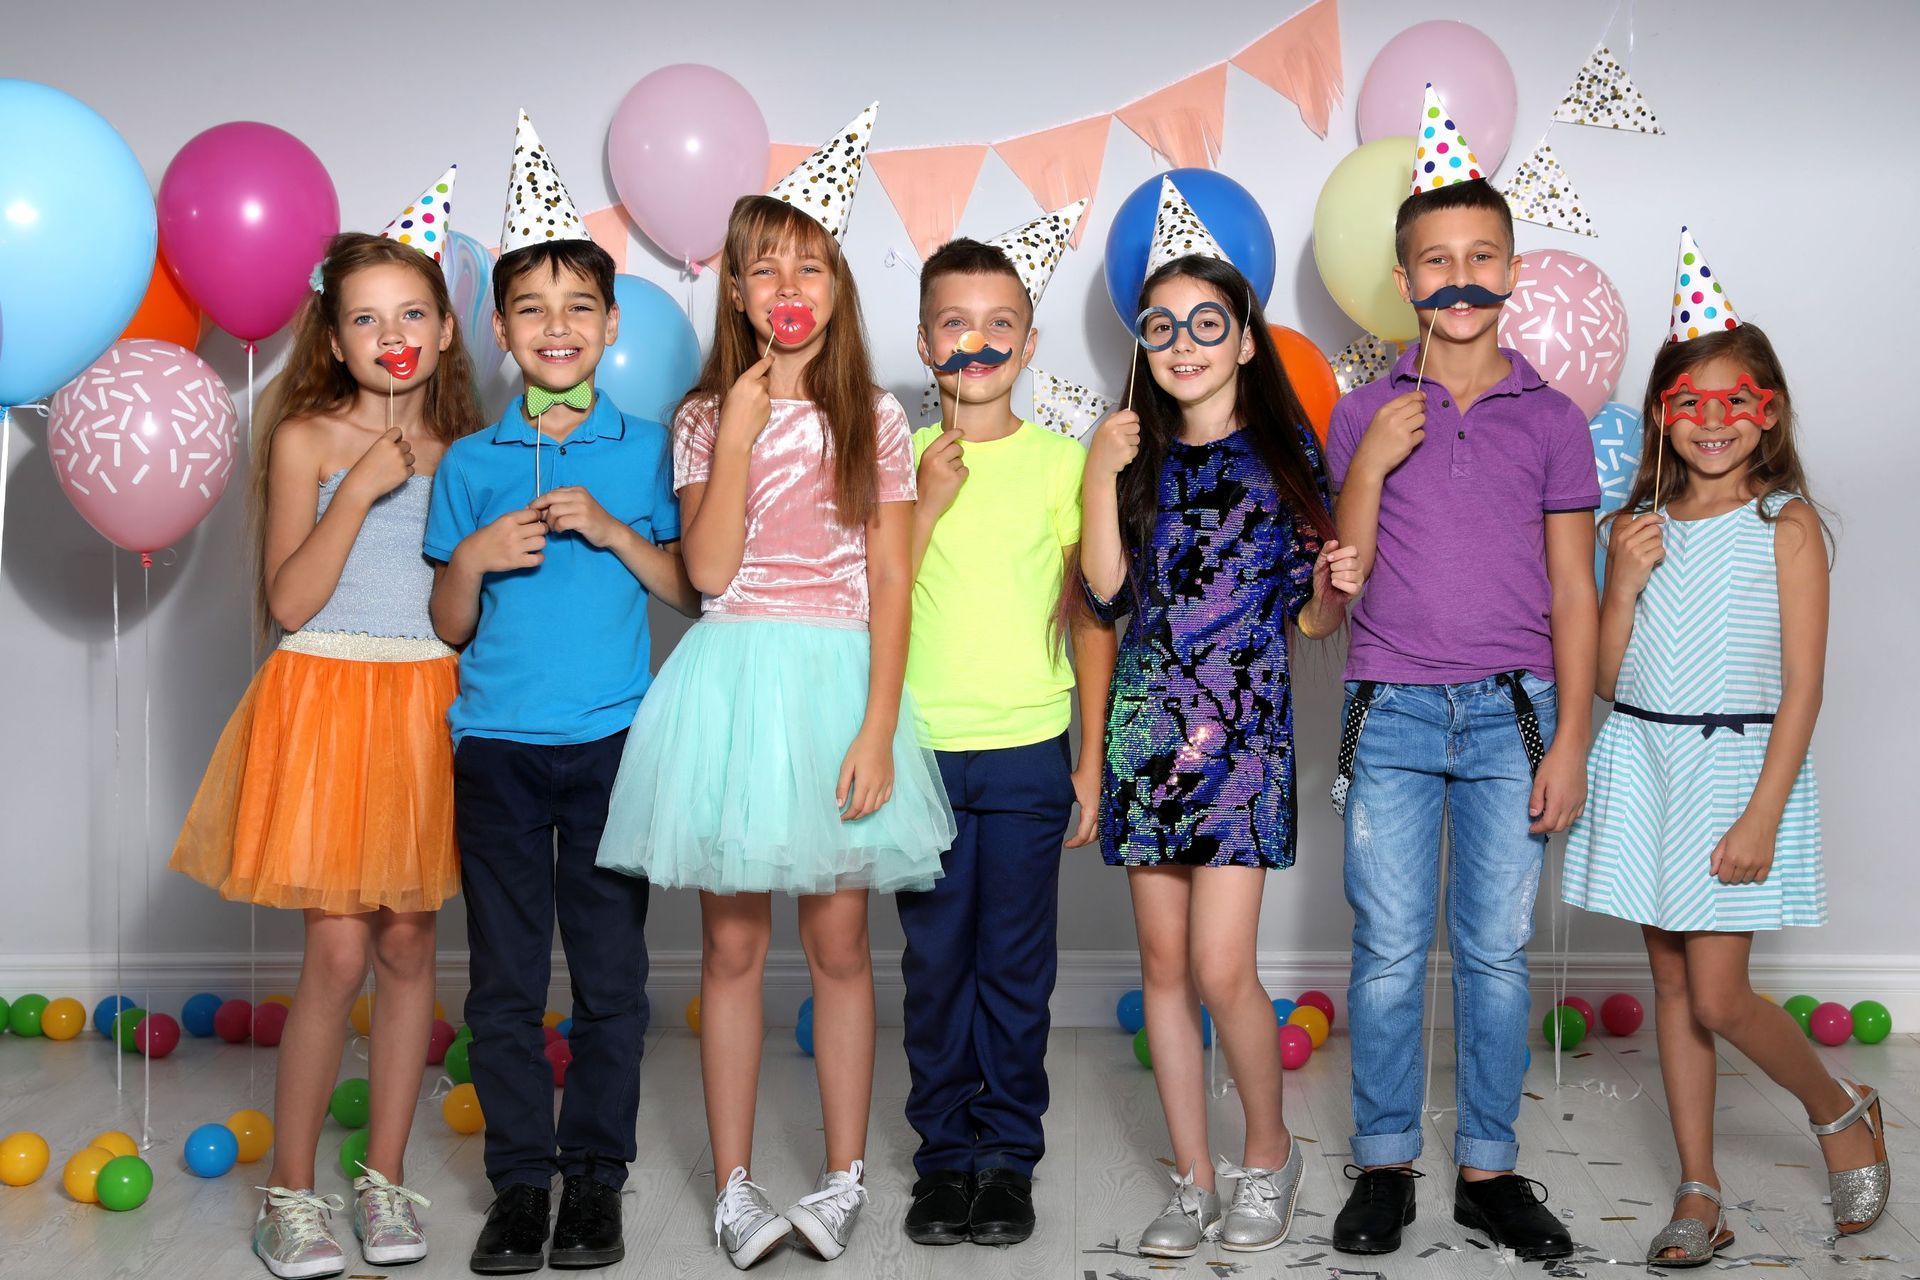 A children's birthday party in San Jose, California rented our photo booth at Flash Party Photo Booth 